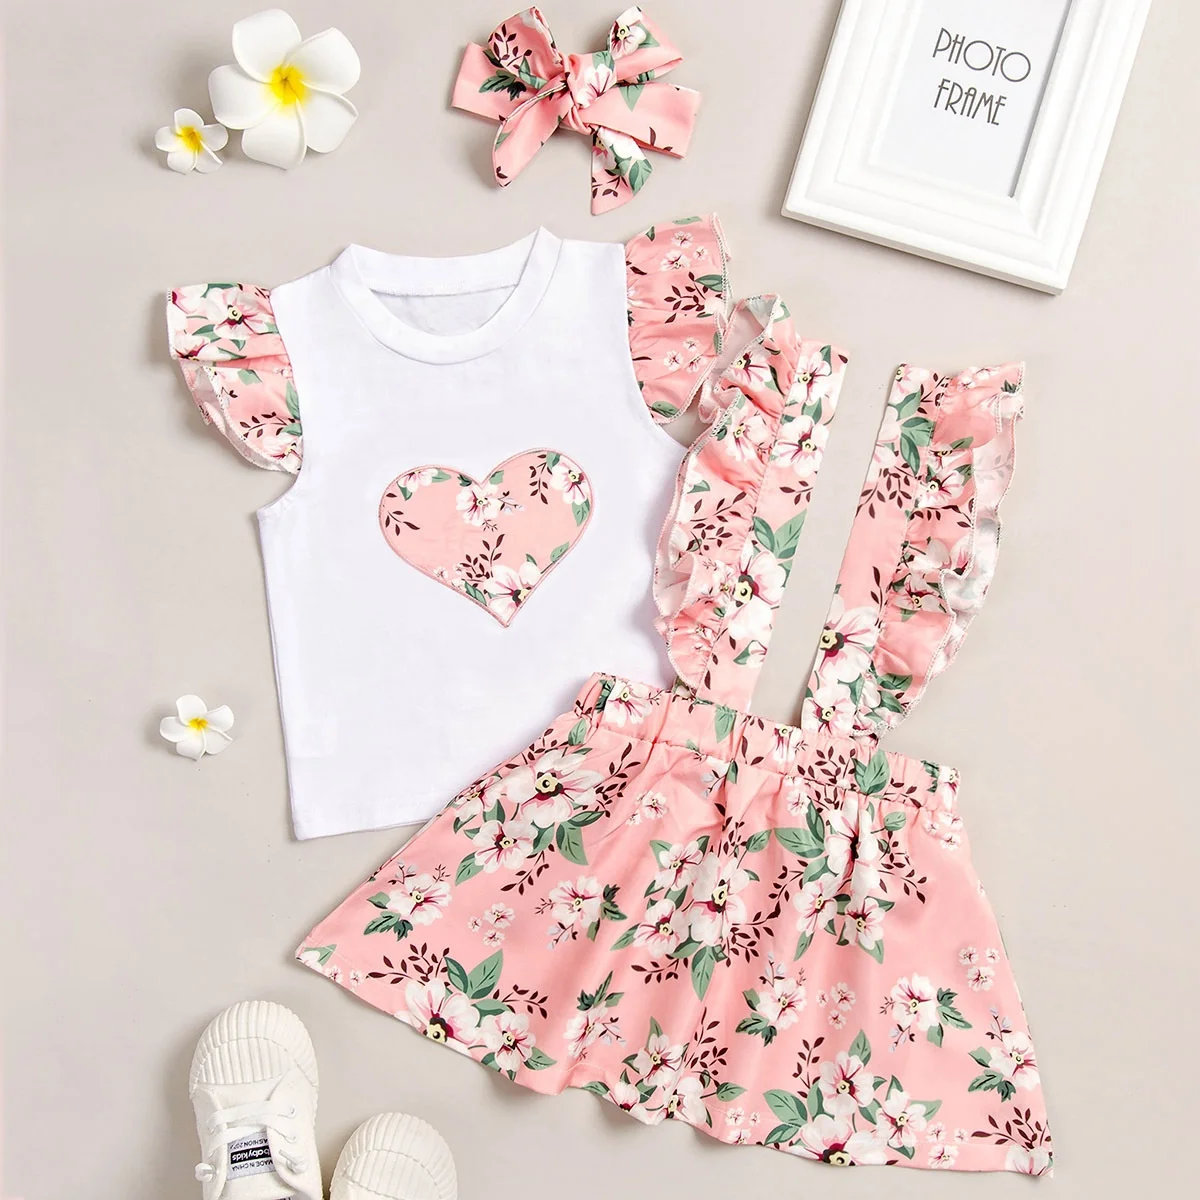 

2020 Sweet Summer Kids Baby Girl Clothes Set Pink Short Sleeve T-Shirt Tops+Floral Suspender Skirts 3pcs Outfits Casual Clothing, As picture